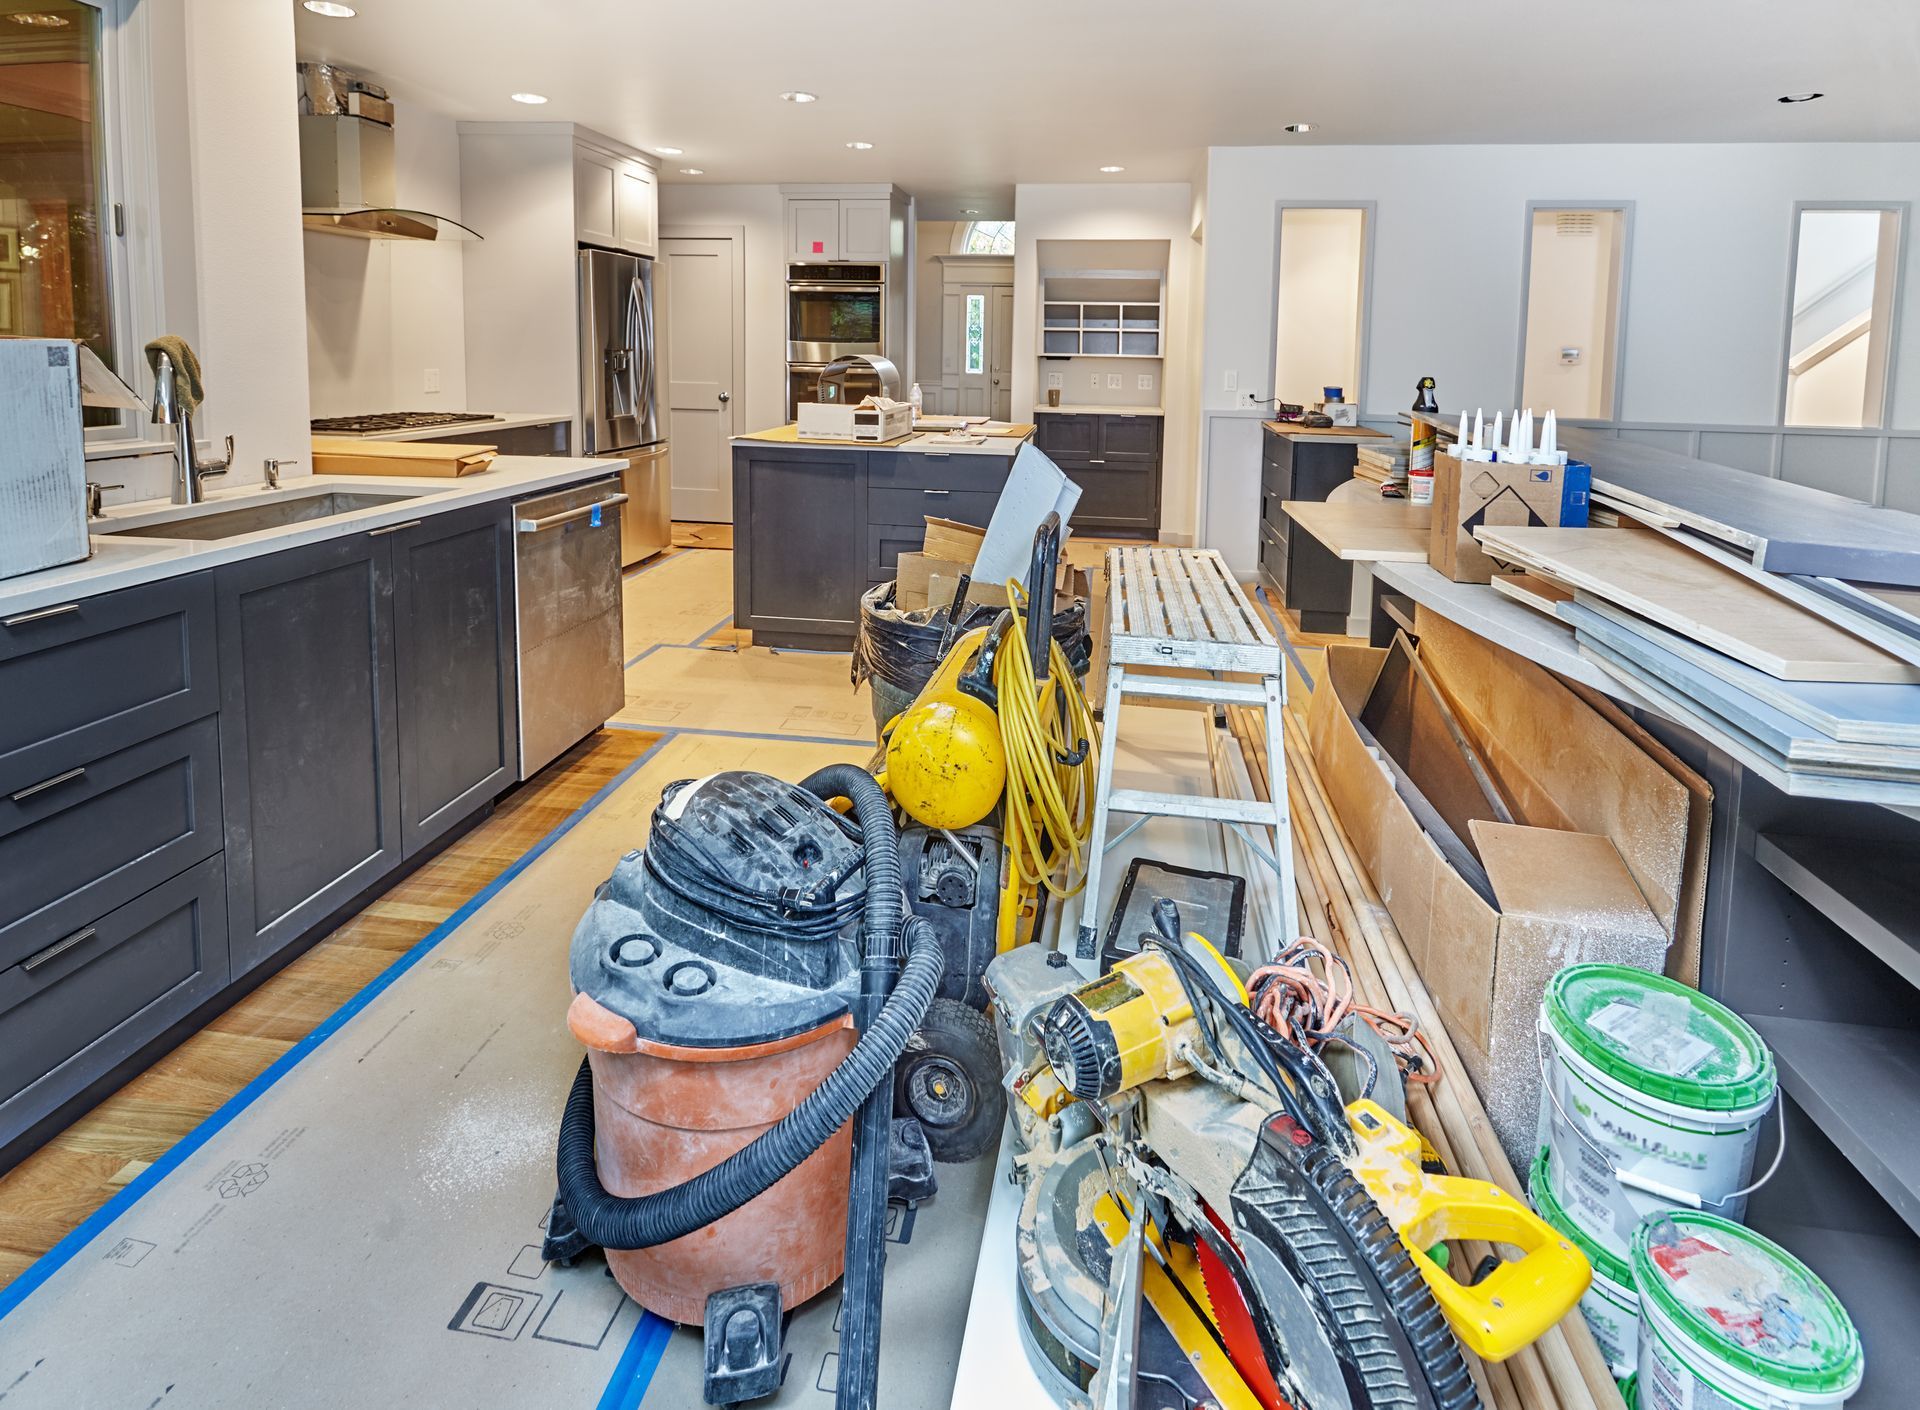 Construction gear neatly put aside in a freshly remodeled kitchen space. The kitchen is in need of a post construction cleaning.